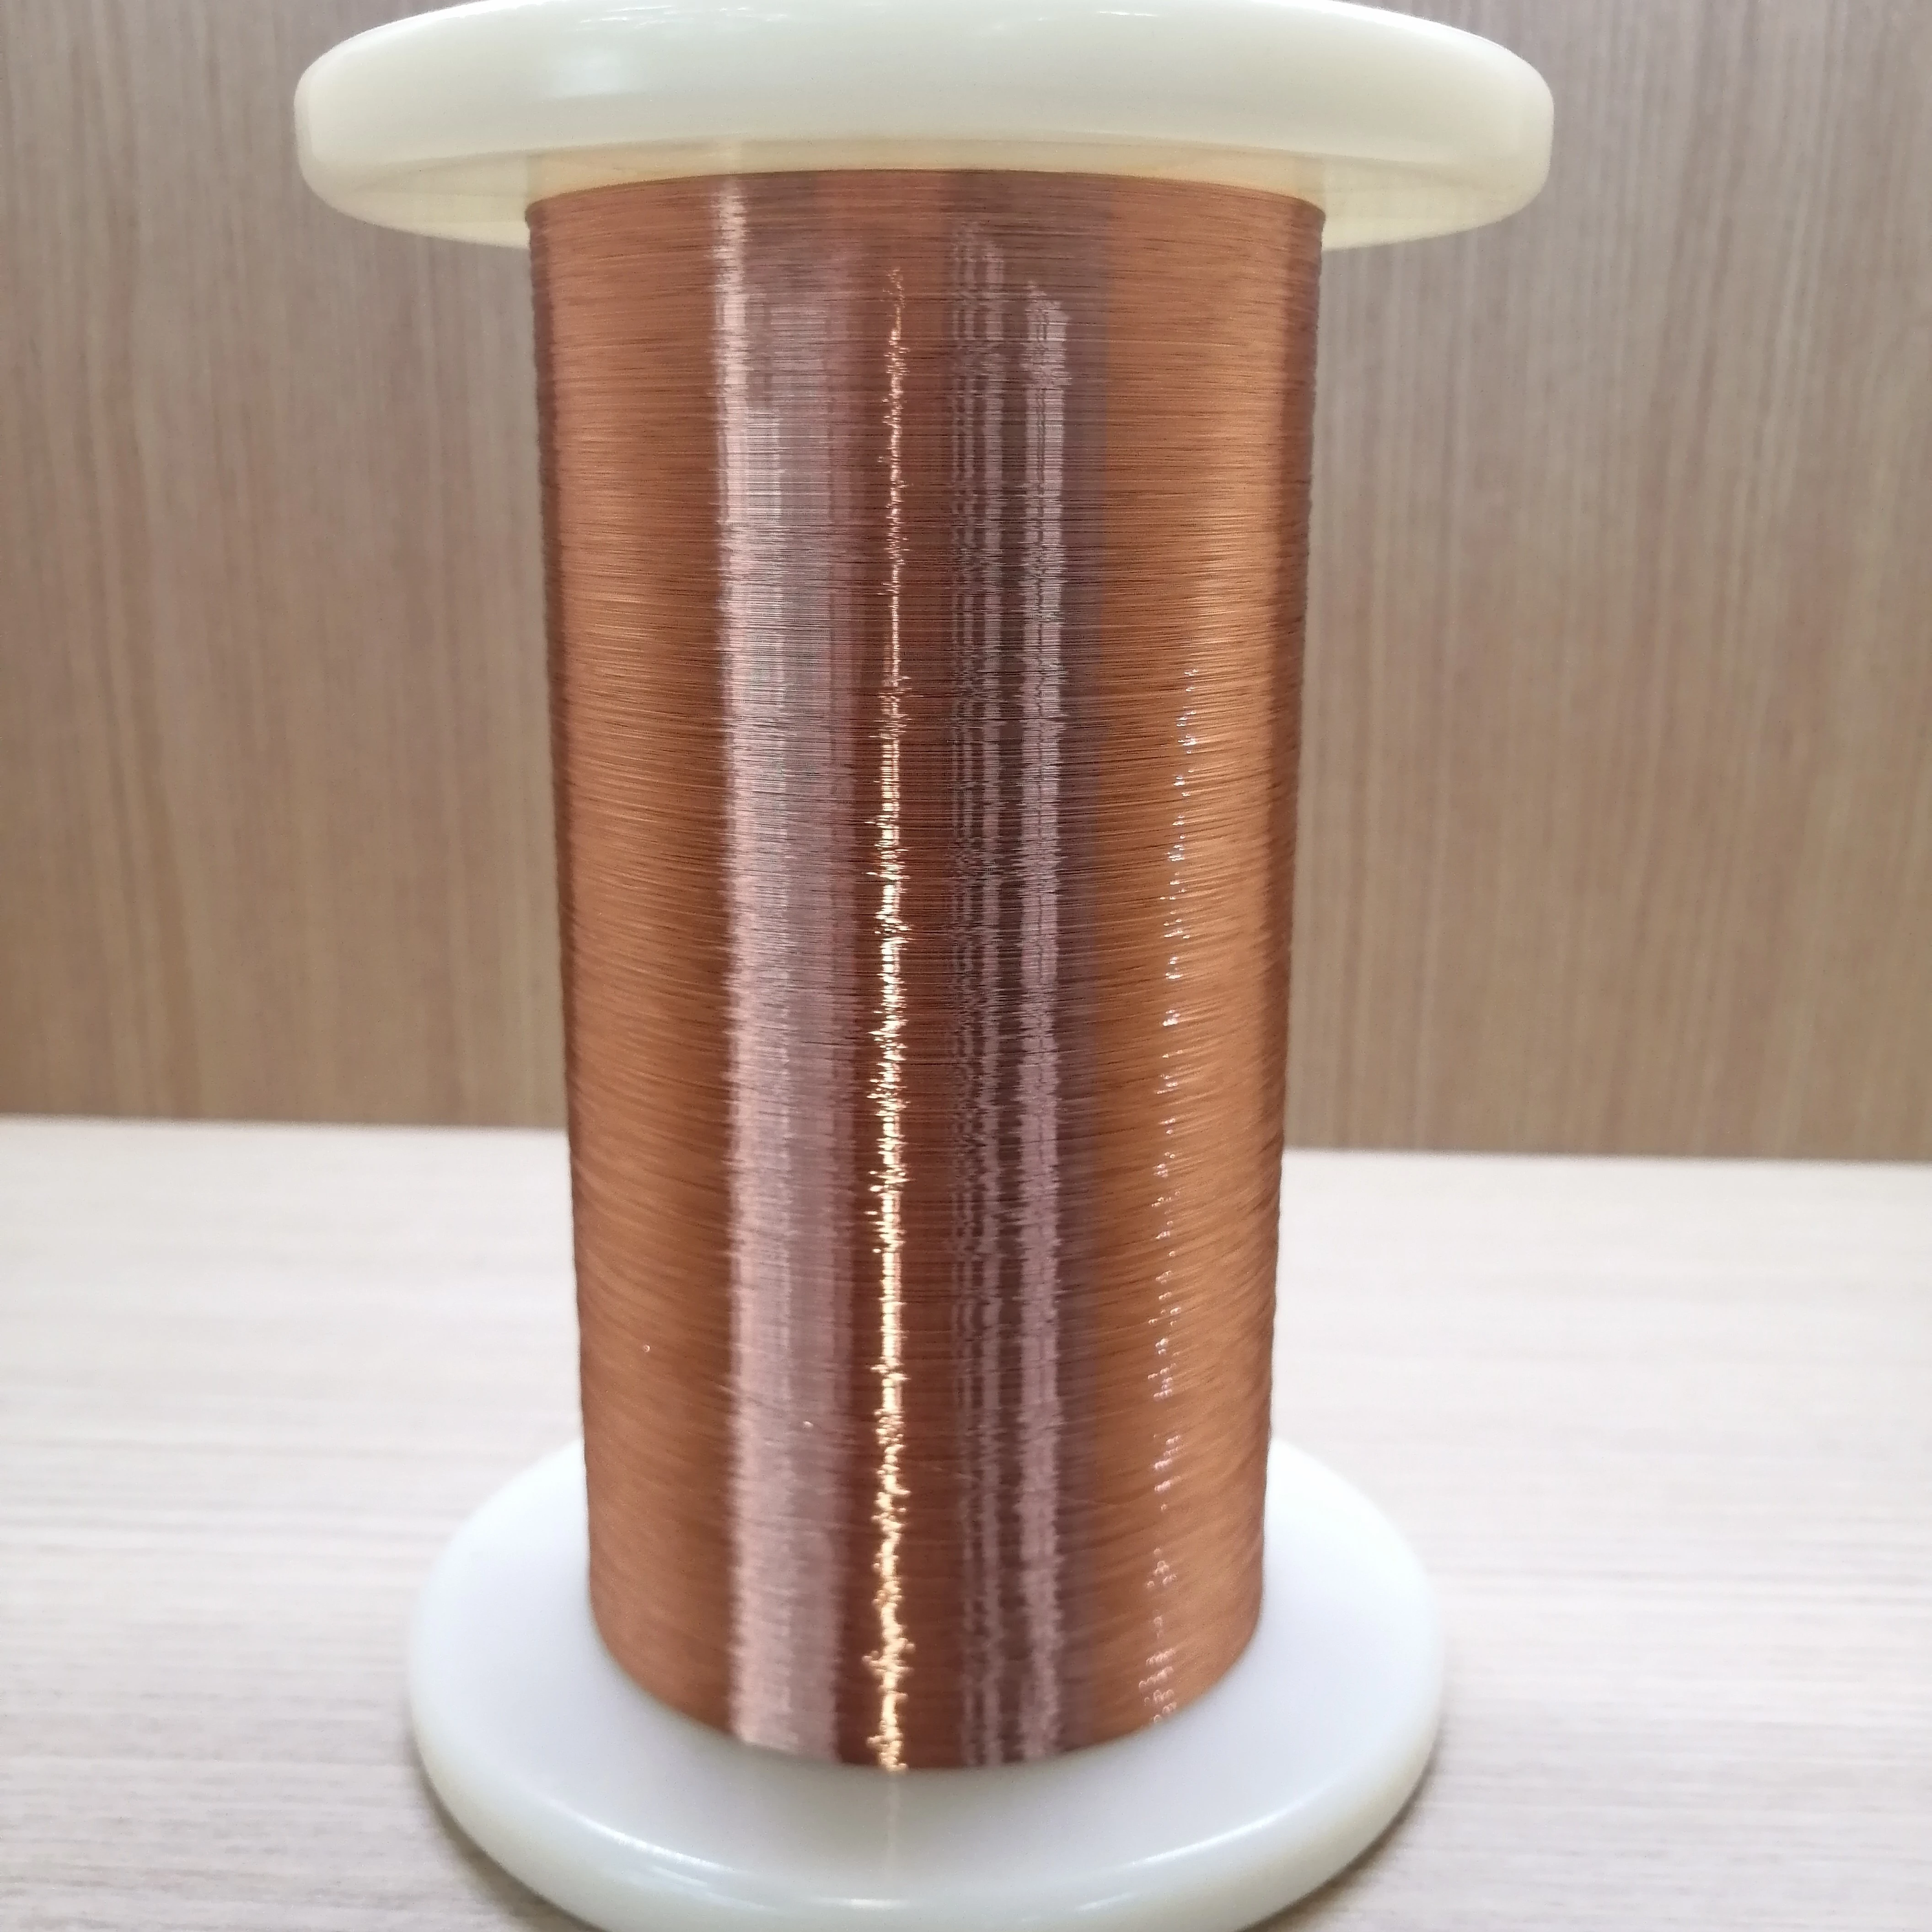 Ultra-fine enameled wires 0.09mm Polyesterimide enameled round copper wires with self bonding layer.